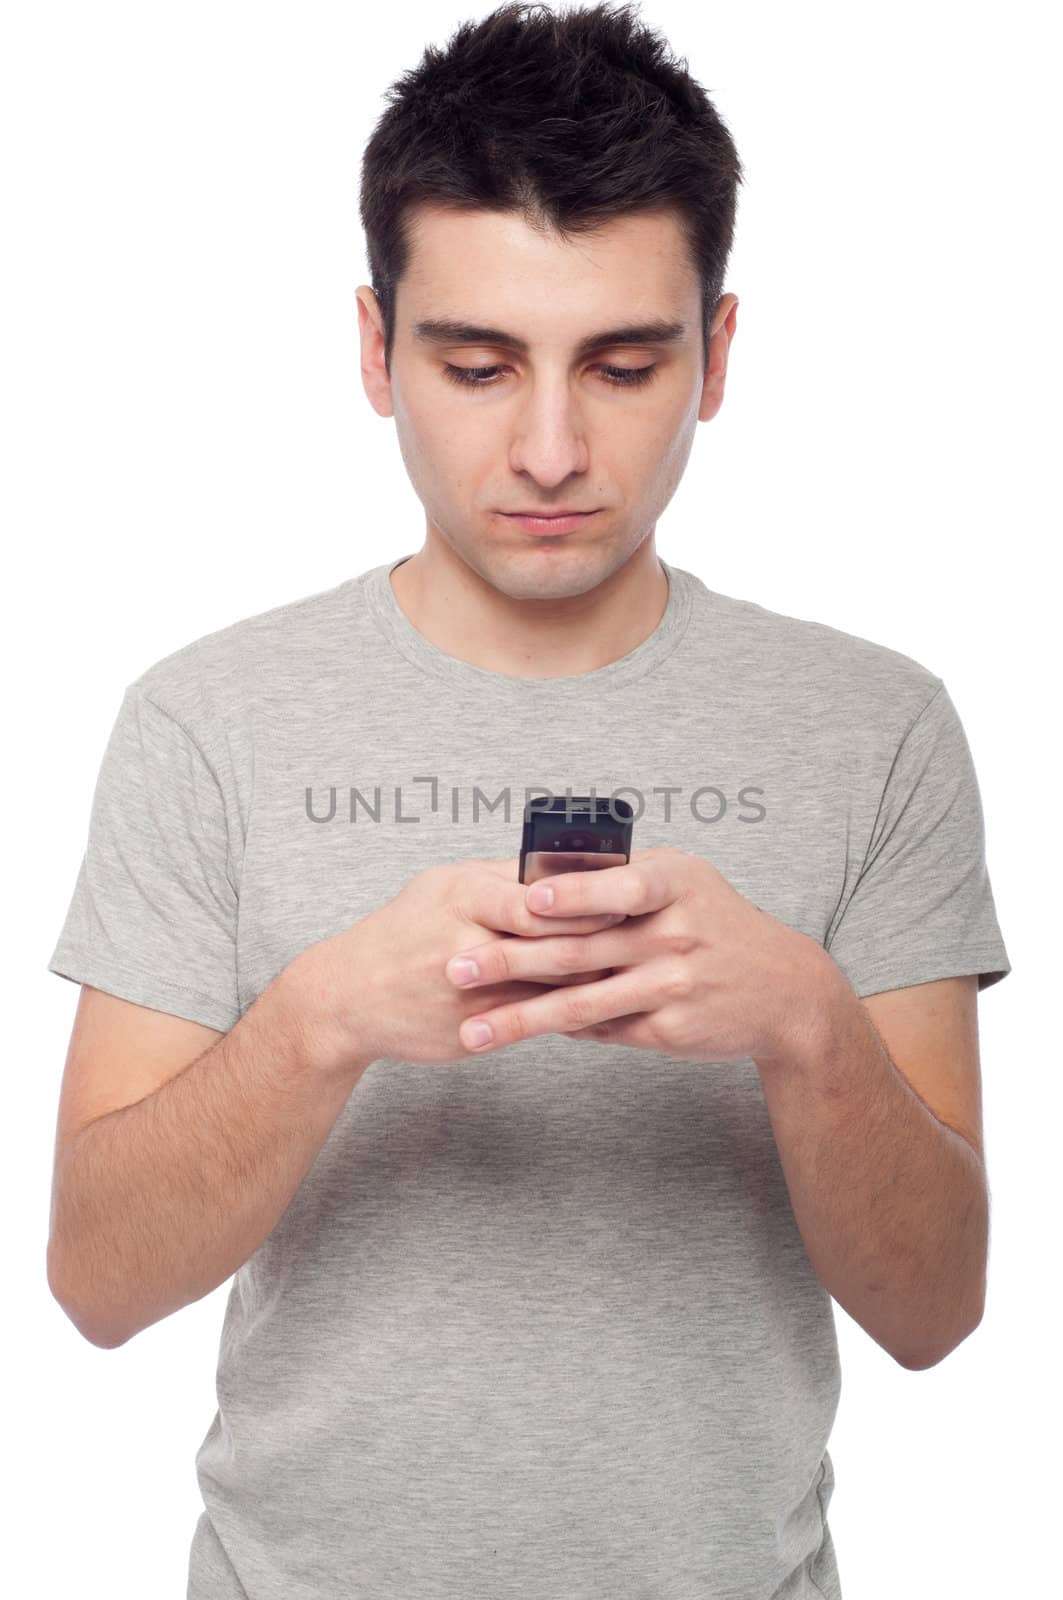 young casual man sending a text message isolated on white background 